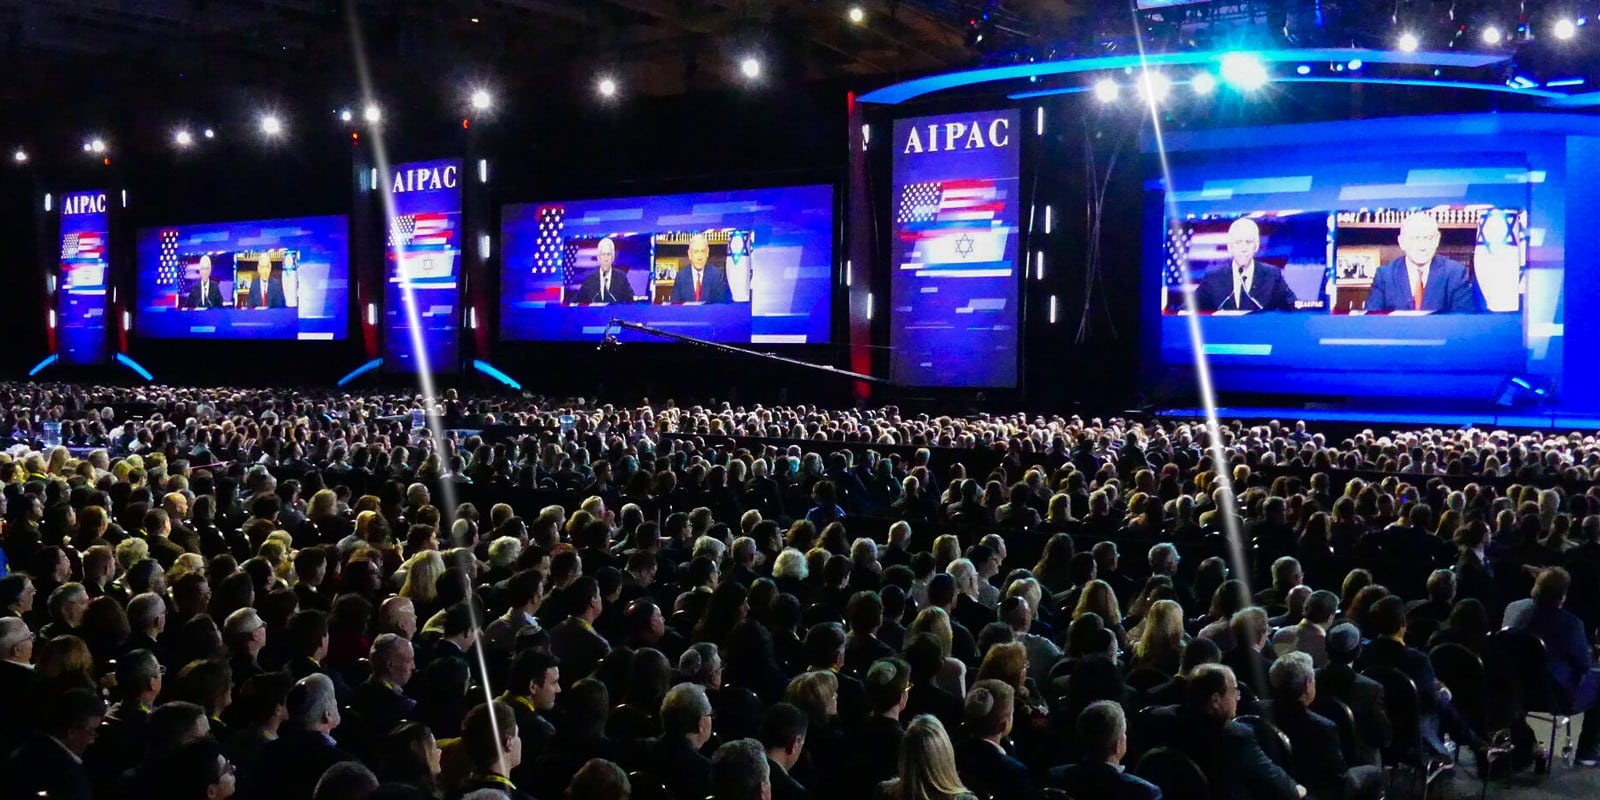 March 1, 2020, United States The AIPAC Policy Conference which is the largest meeting of the pro Israel